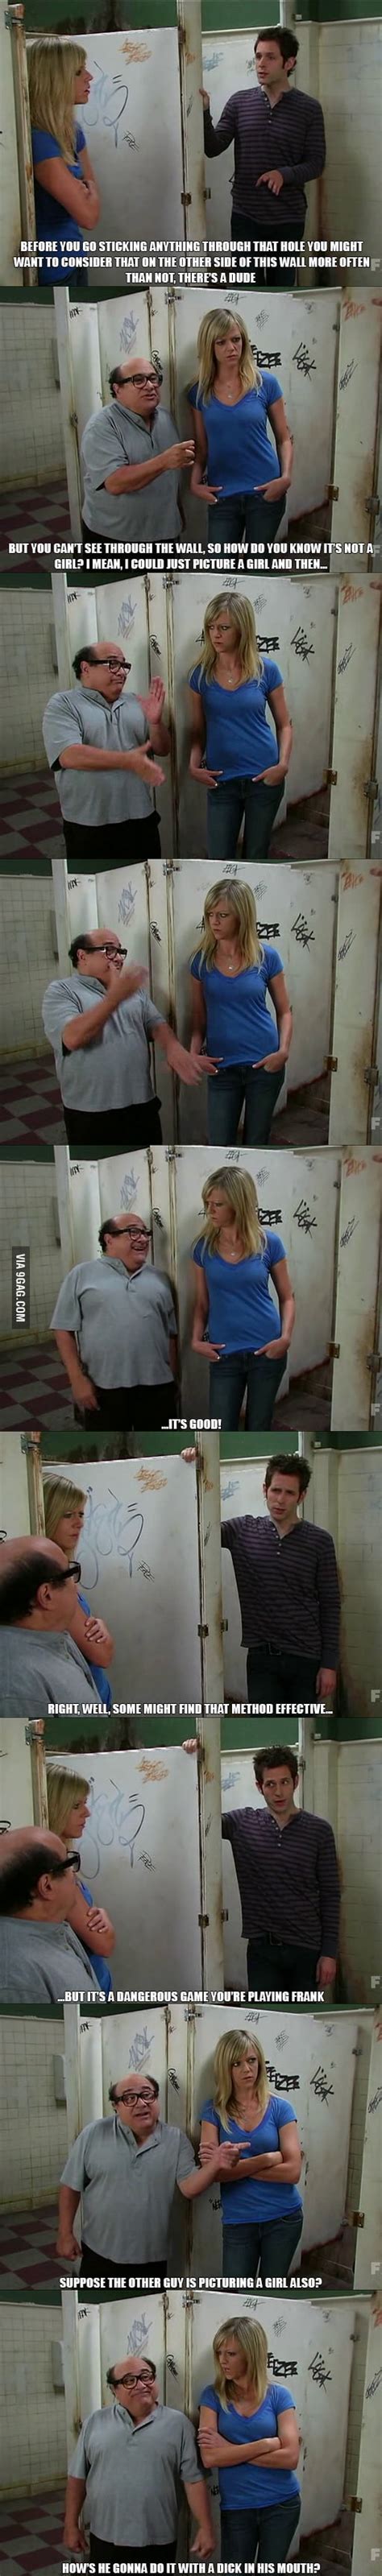 Guys Discussing A Gloryhole Why I Freakin Love This Show 9gag